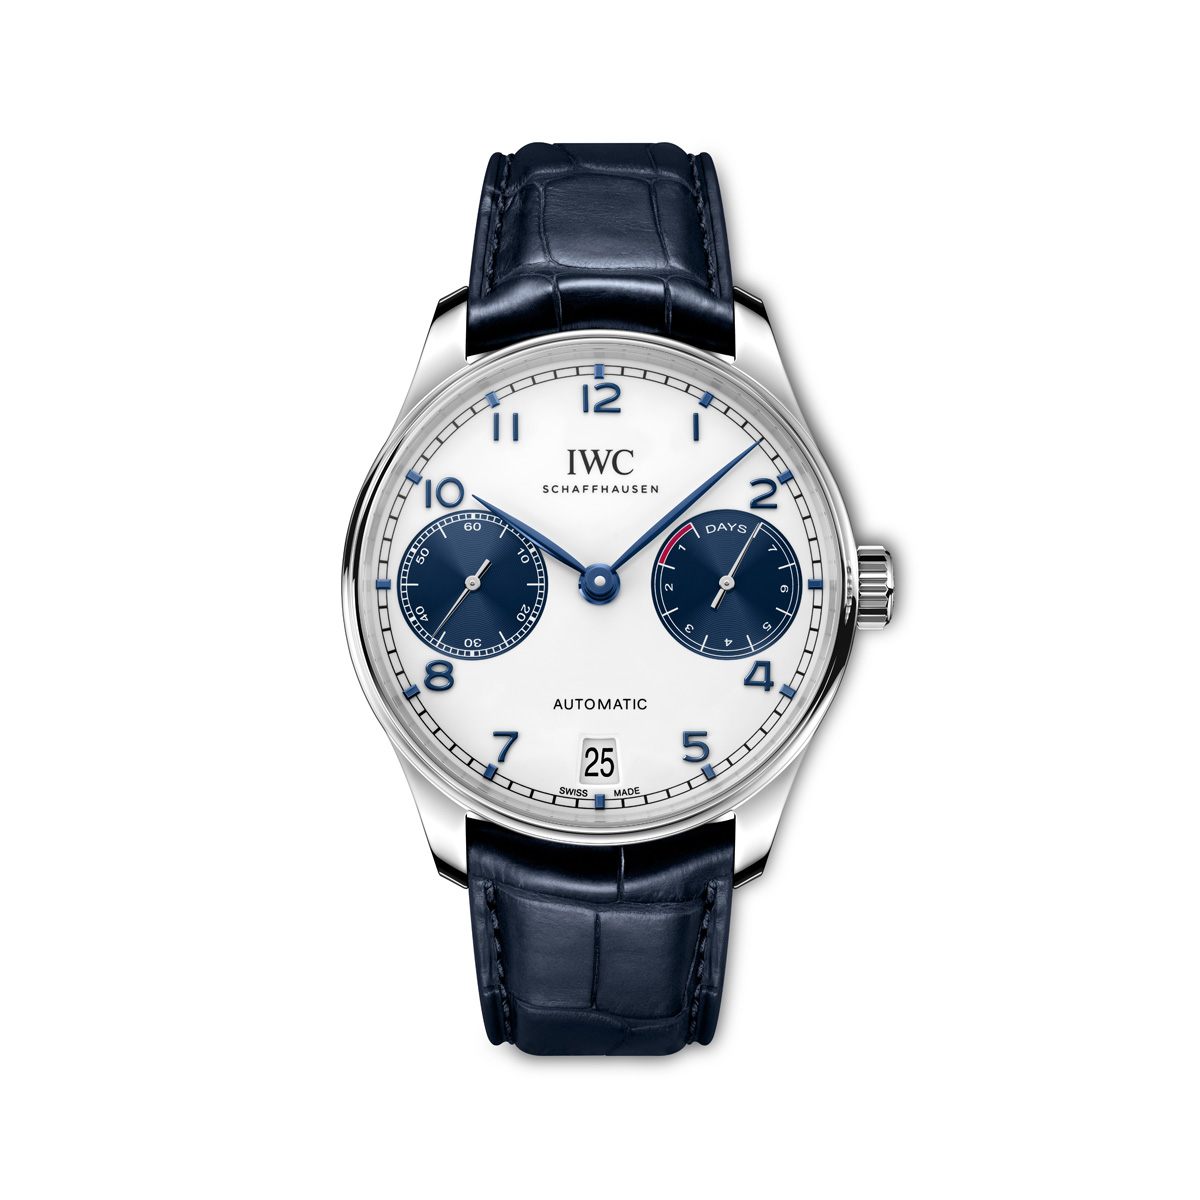 Swiss Replica IWC presents two new Portugieser models with white and blue dials